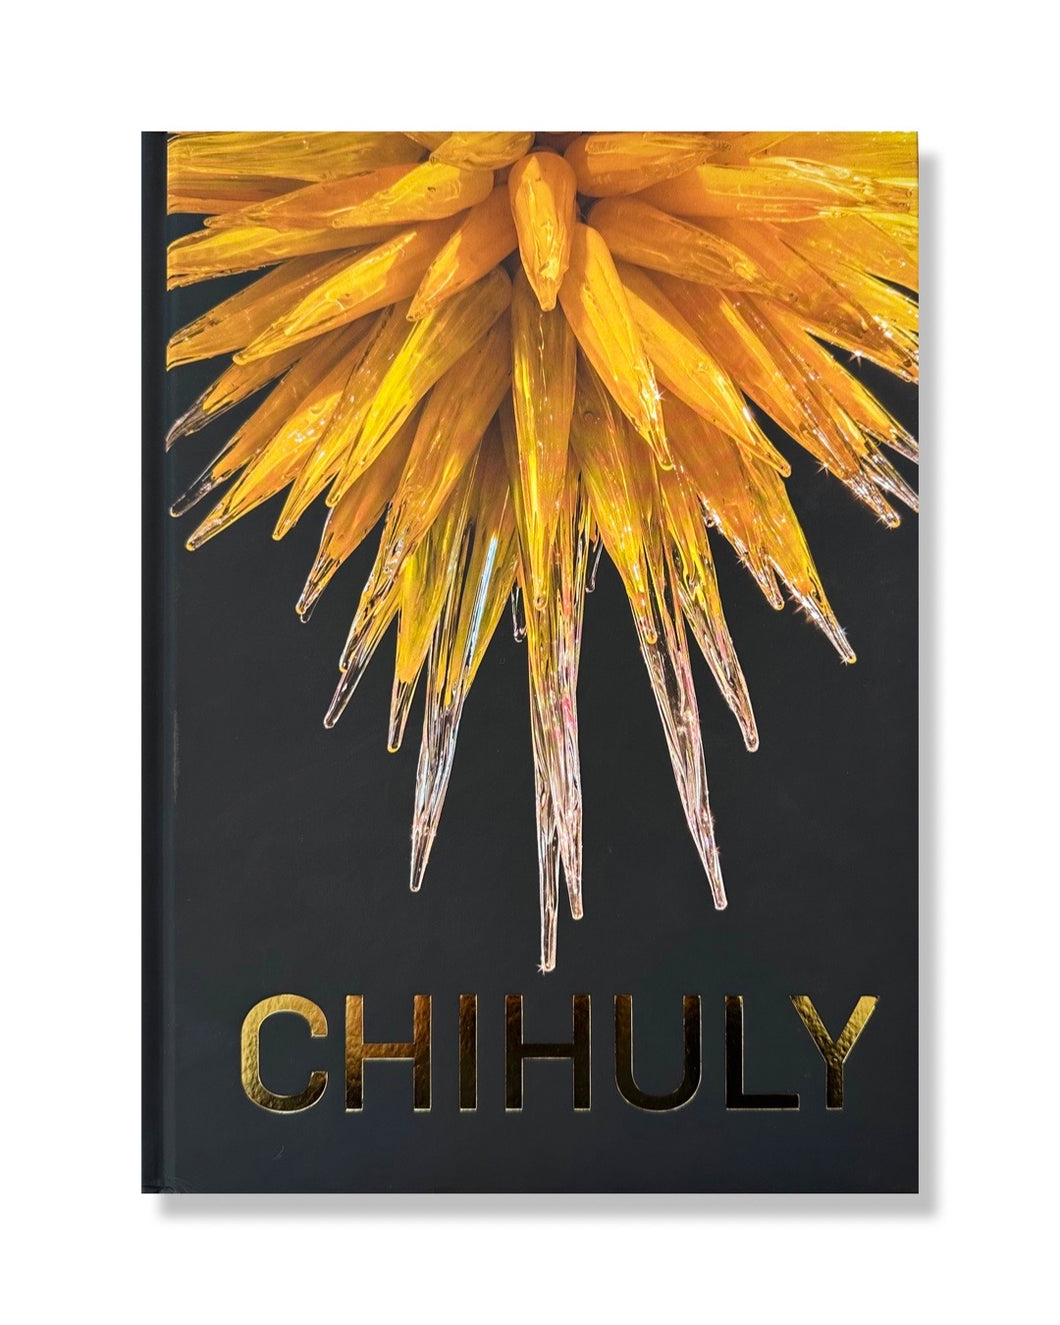 Chihuly (Dutch and English Edition)